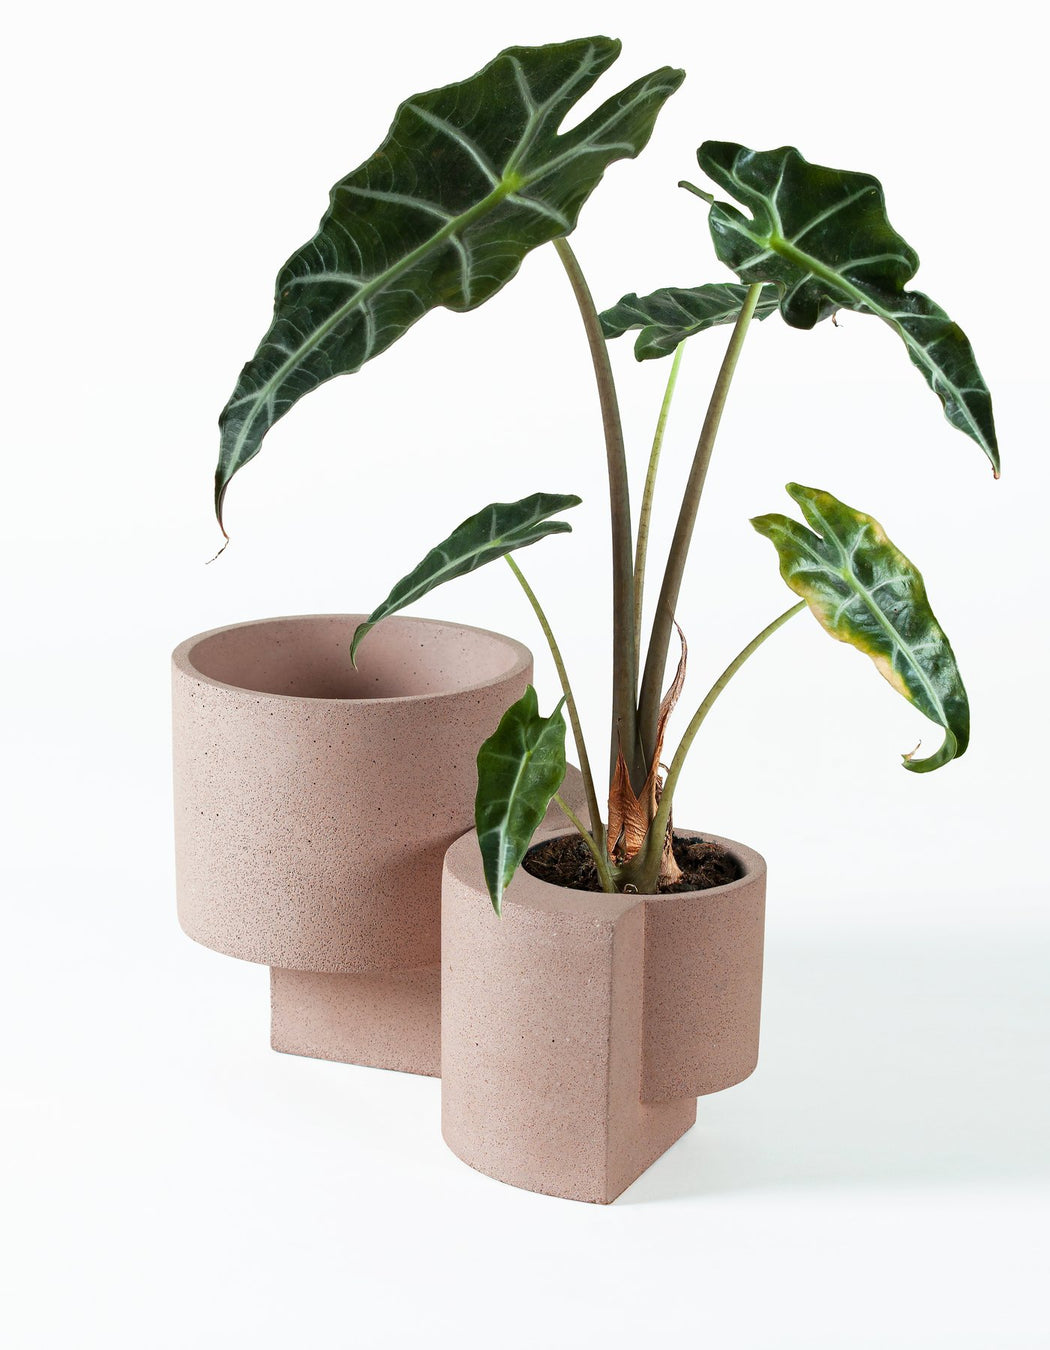 Small Platform Planter in Coral